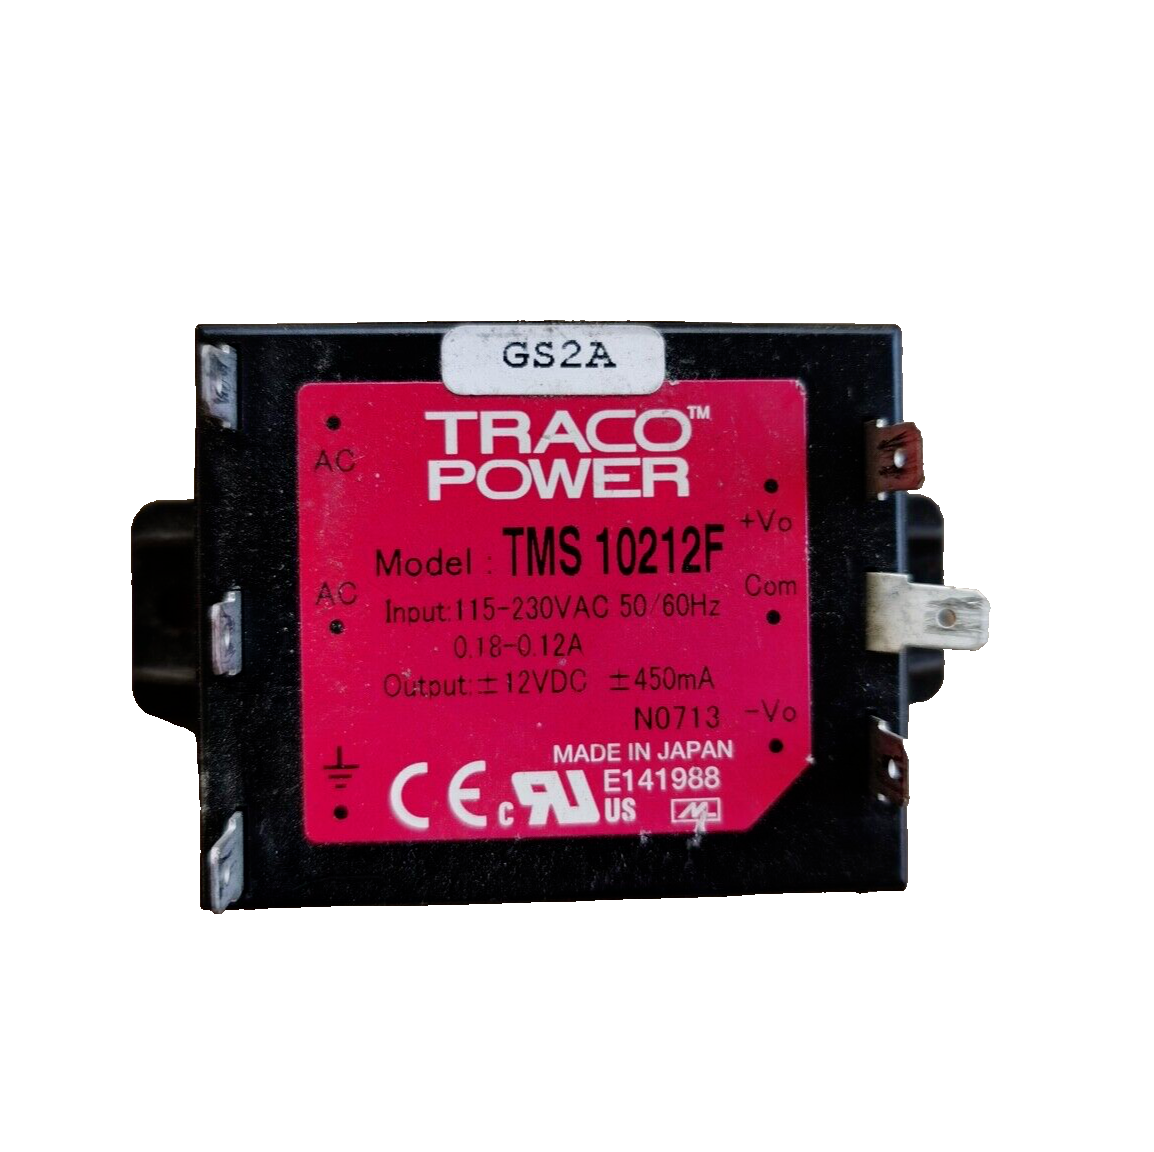 Traco Power TMS 10212F AC to DC converter